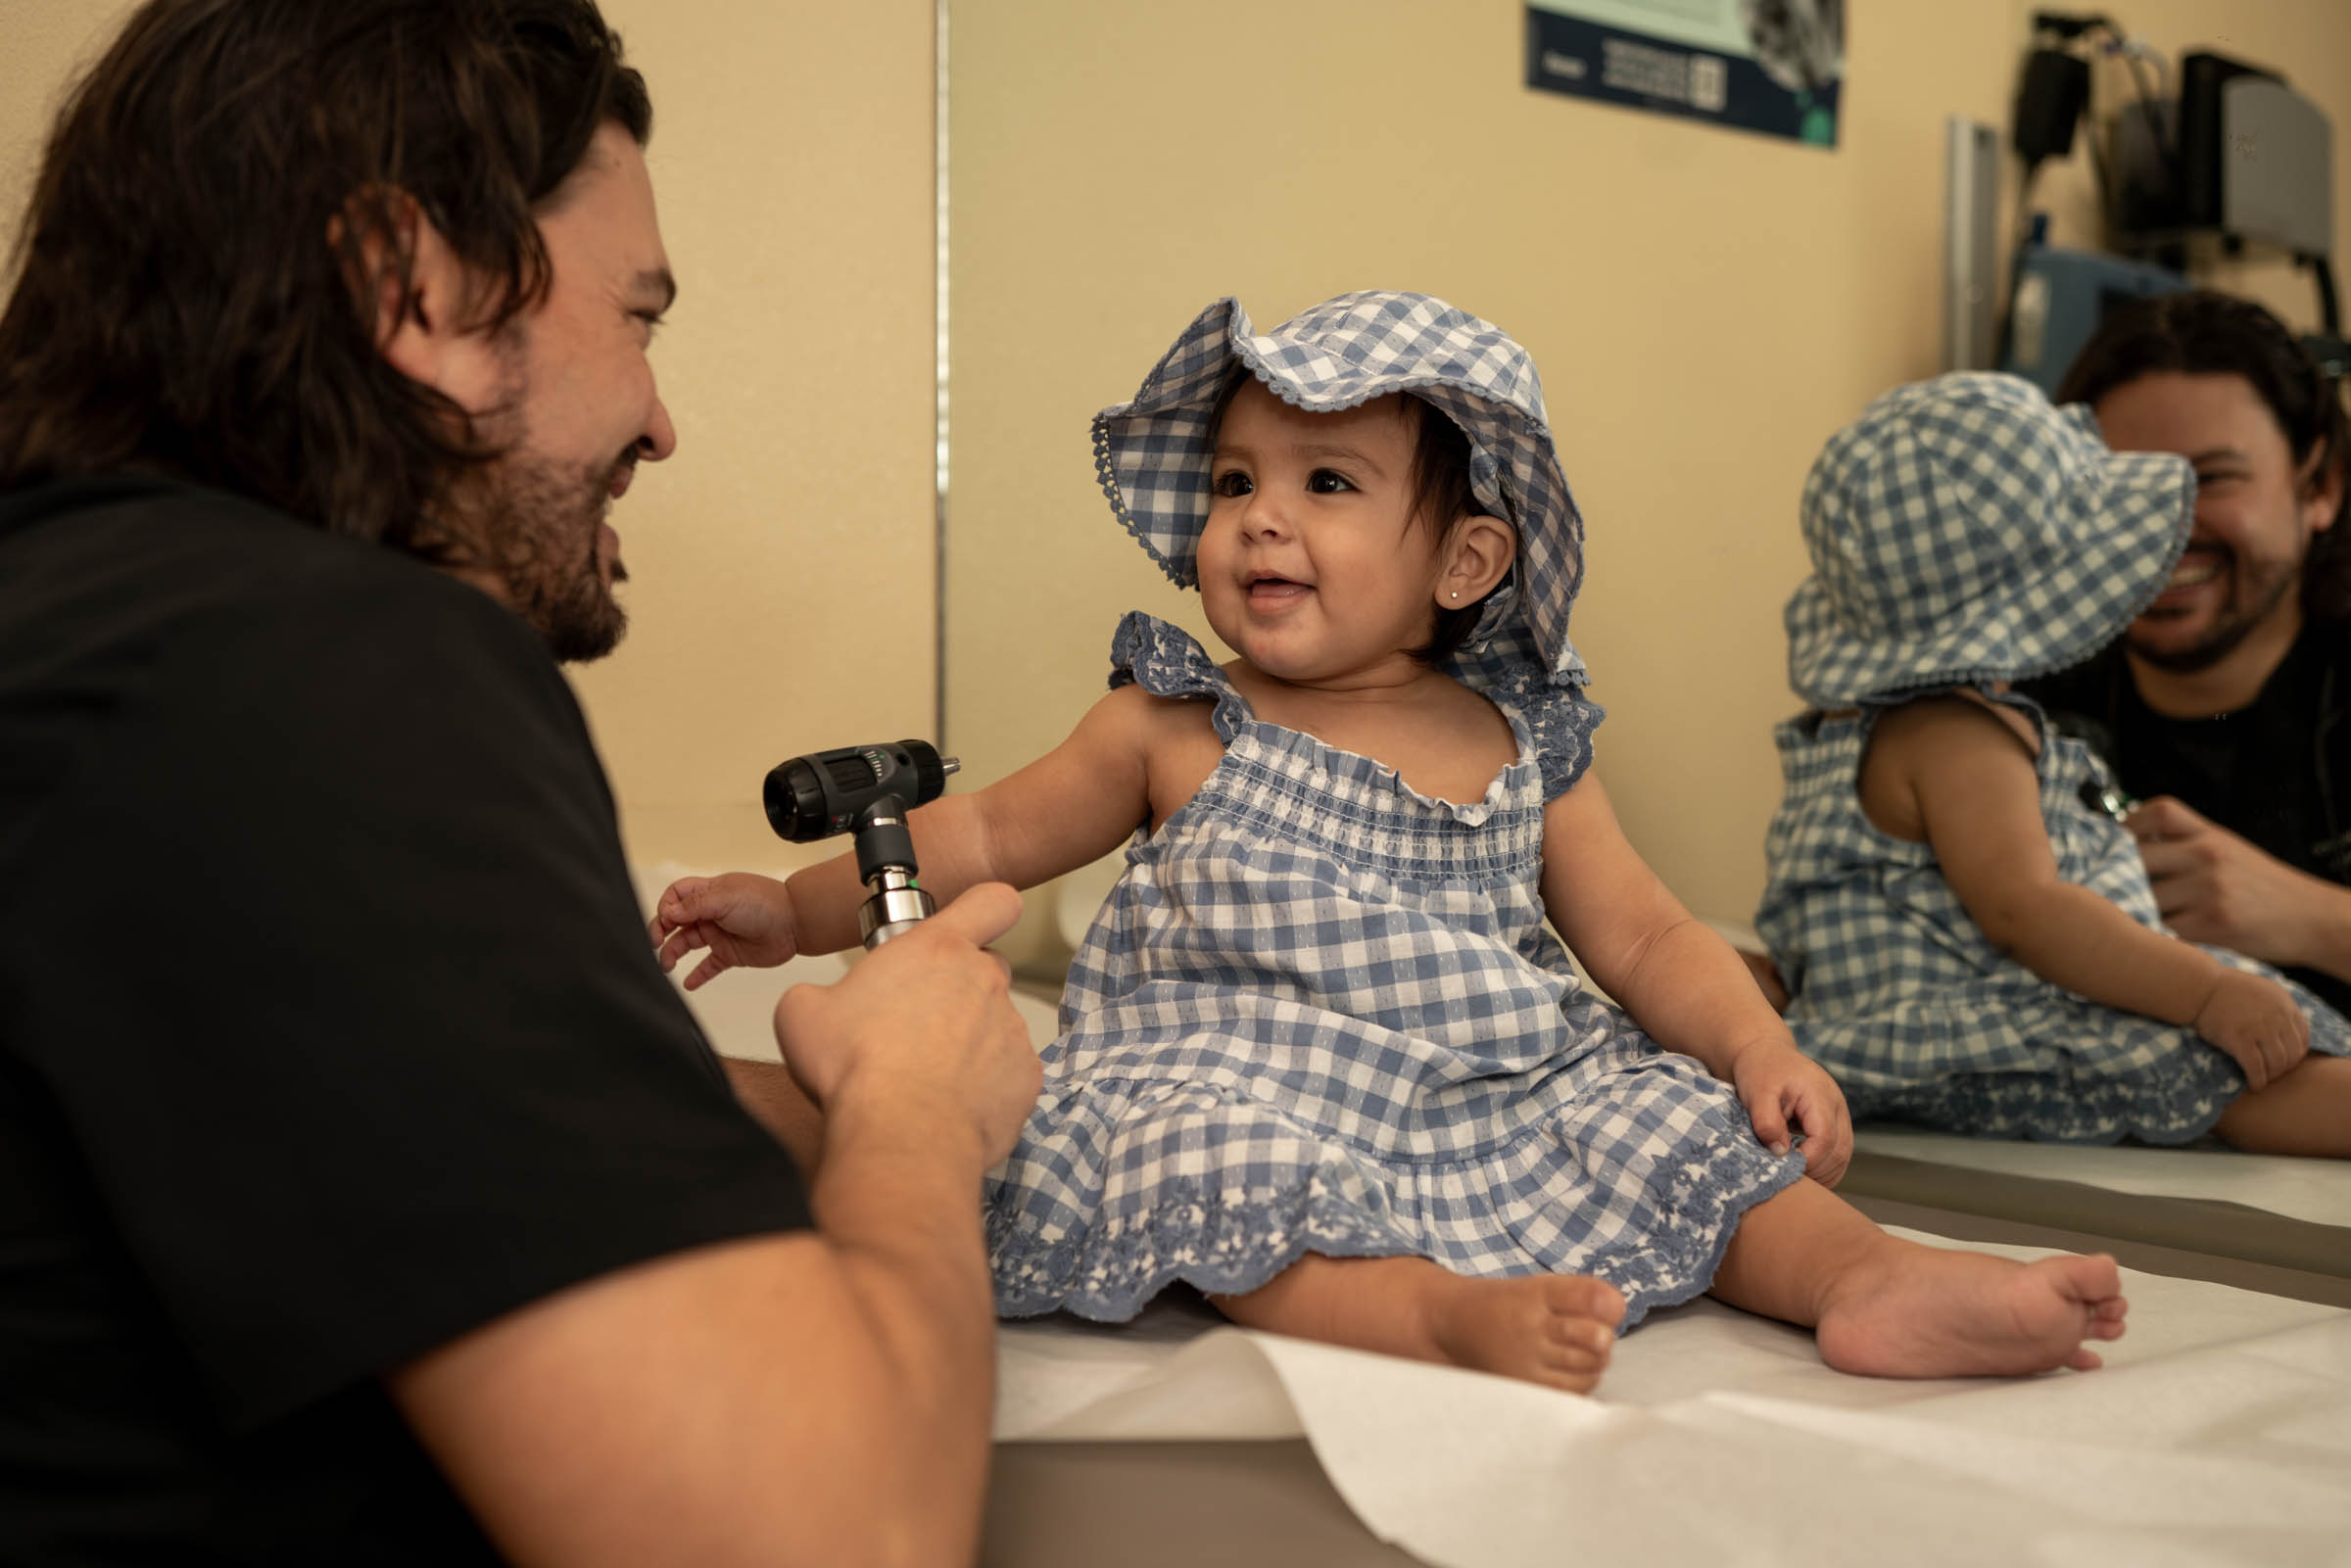 Baby receives access to health care at Cartmill Clinic, a federally qualified health center financed by Capital Impact Partner.